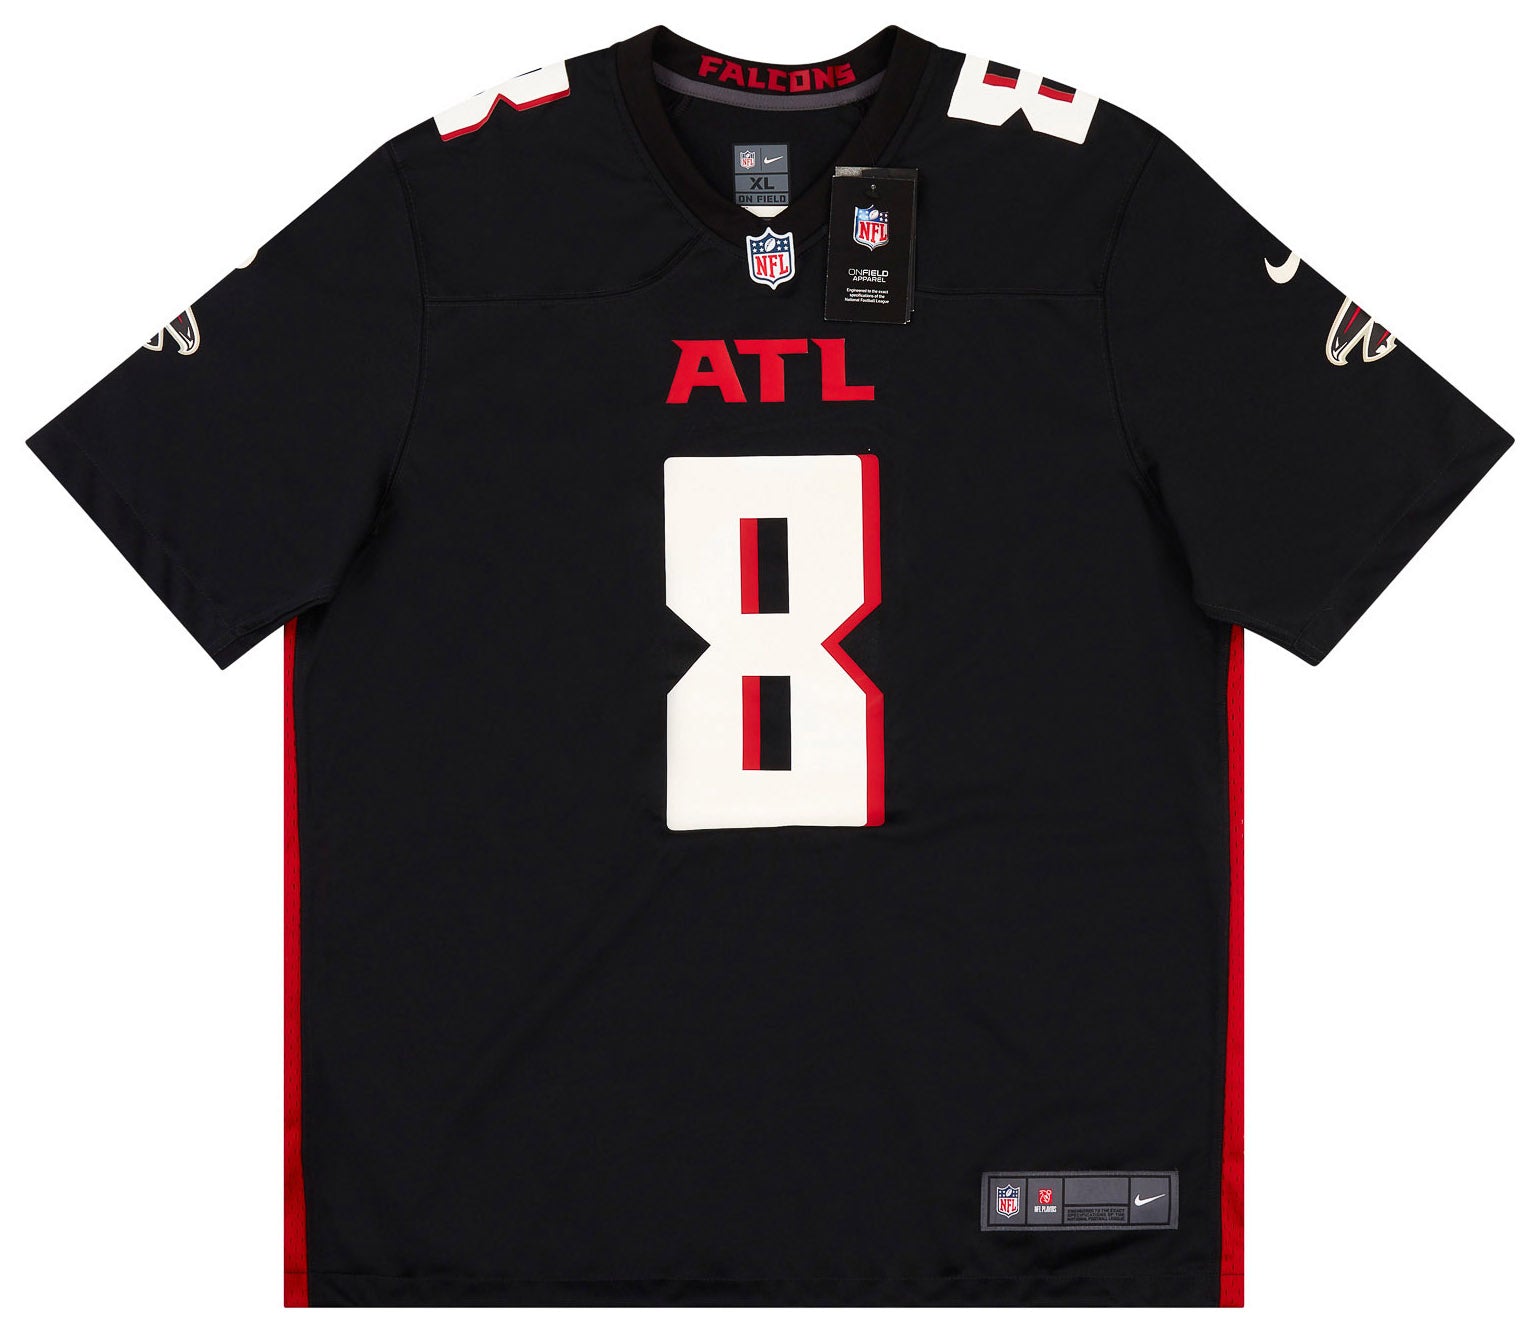 2021-23 ATLANTA FALCONS PITTS #8 NIKE GAME JERSEY (HOME) XL - W